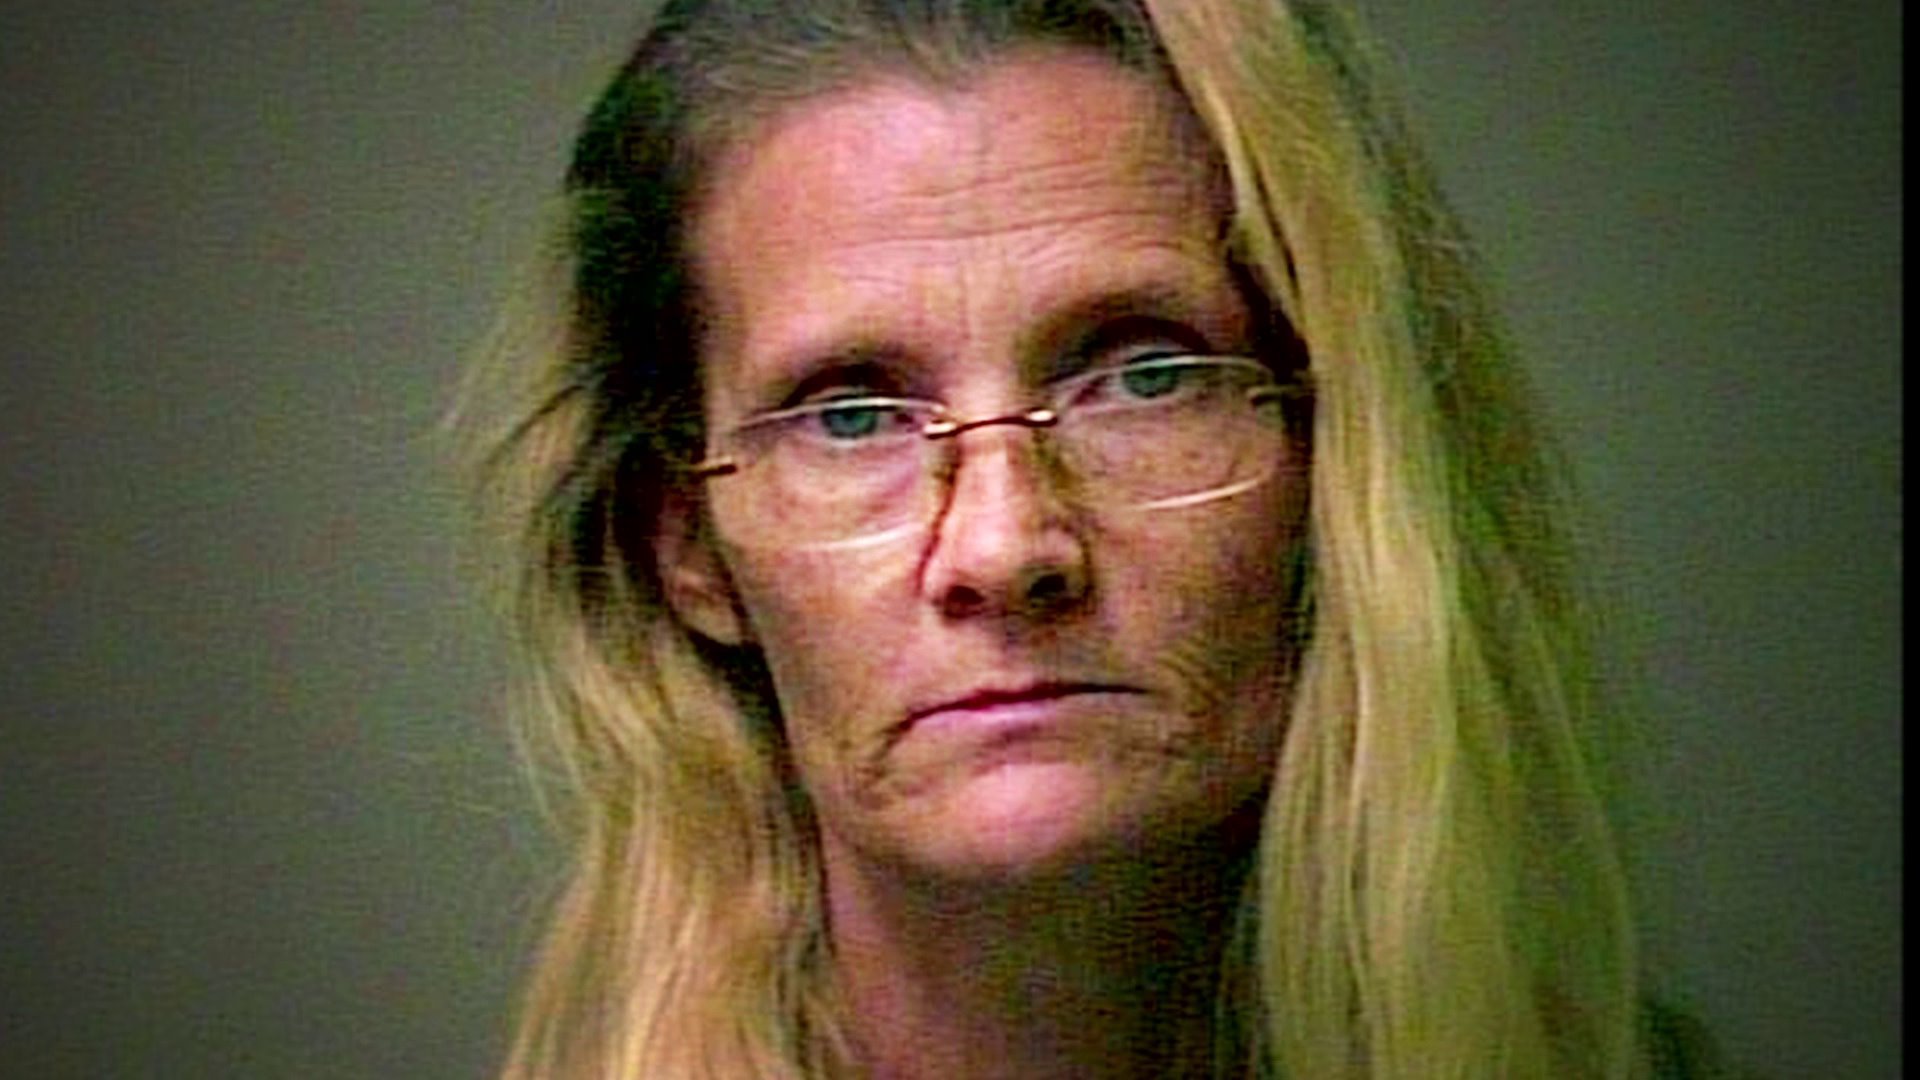 Oklahoma grandmother pleads guilty to child abuse